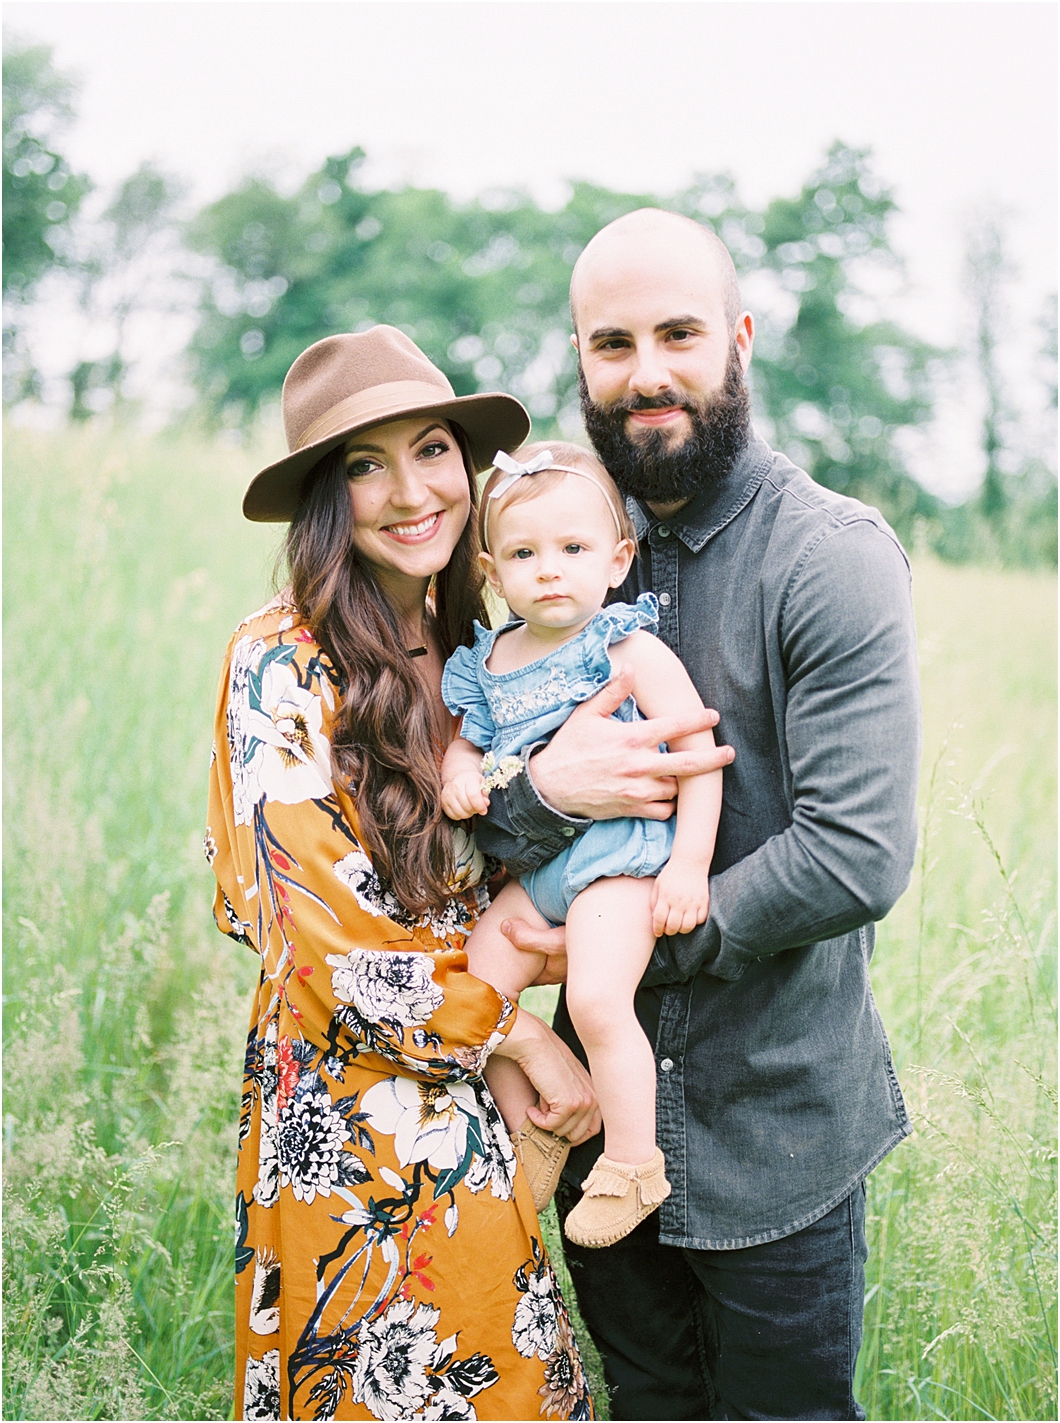 What to wear for family photos, outfit inspiration for family photos | by Hillary Muelleck